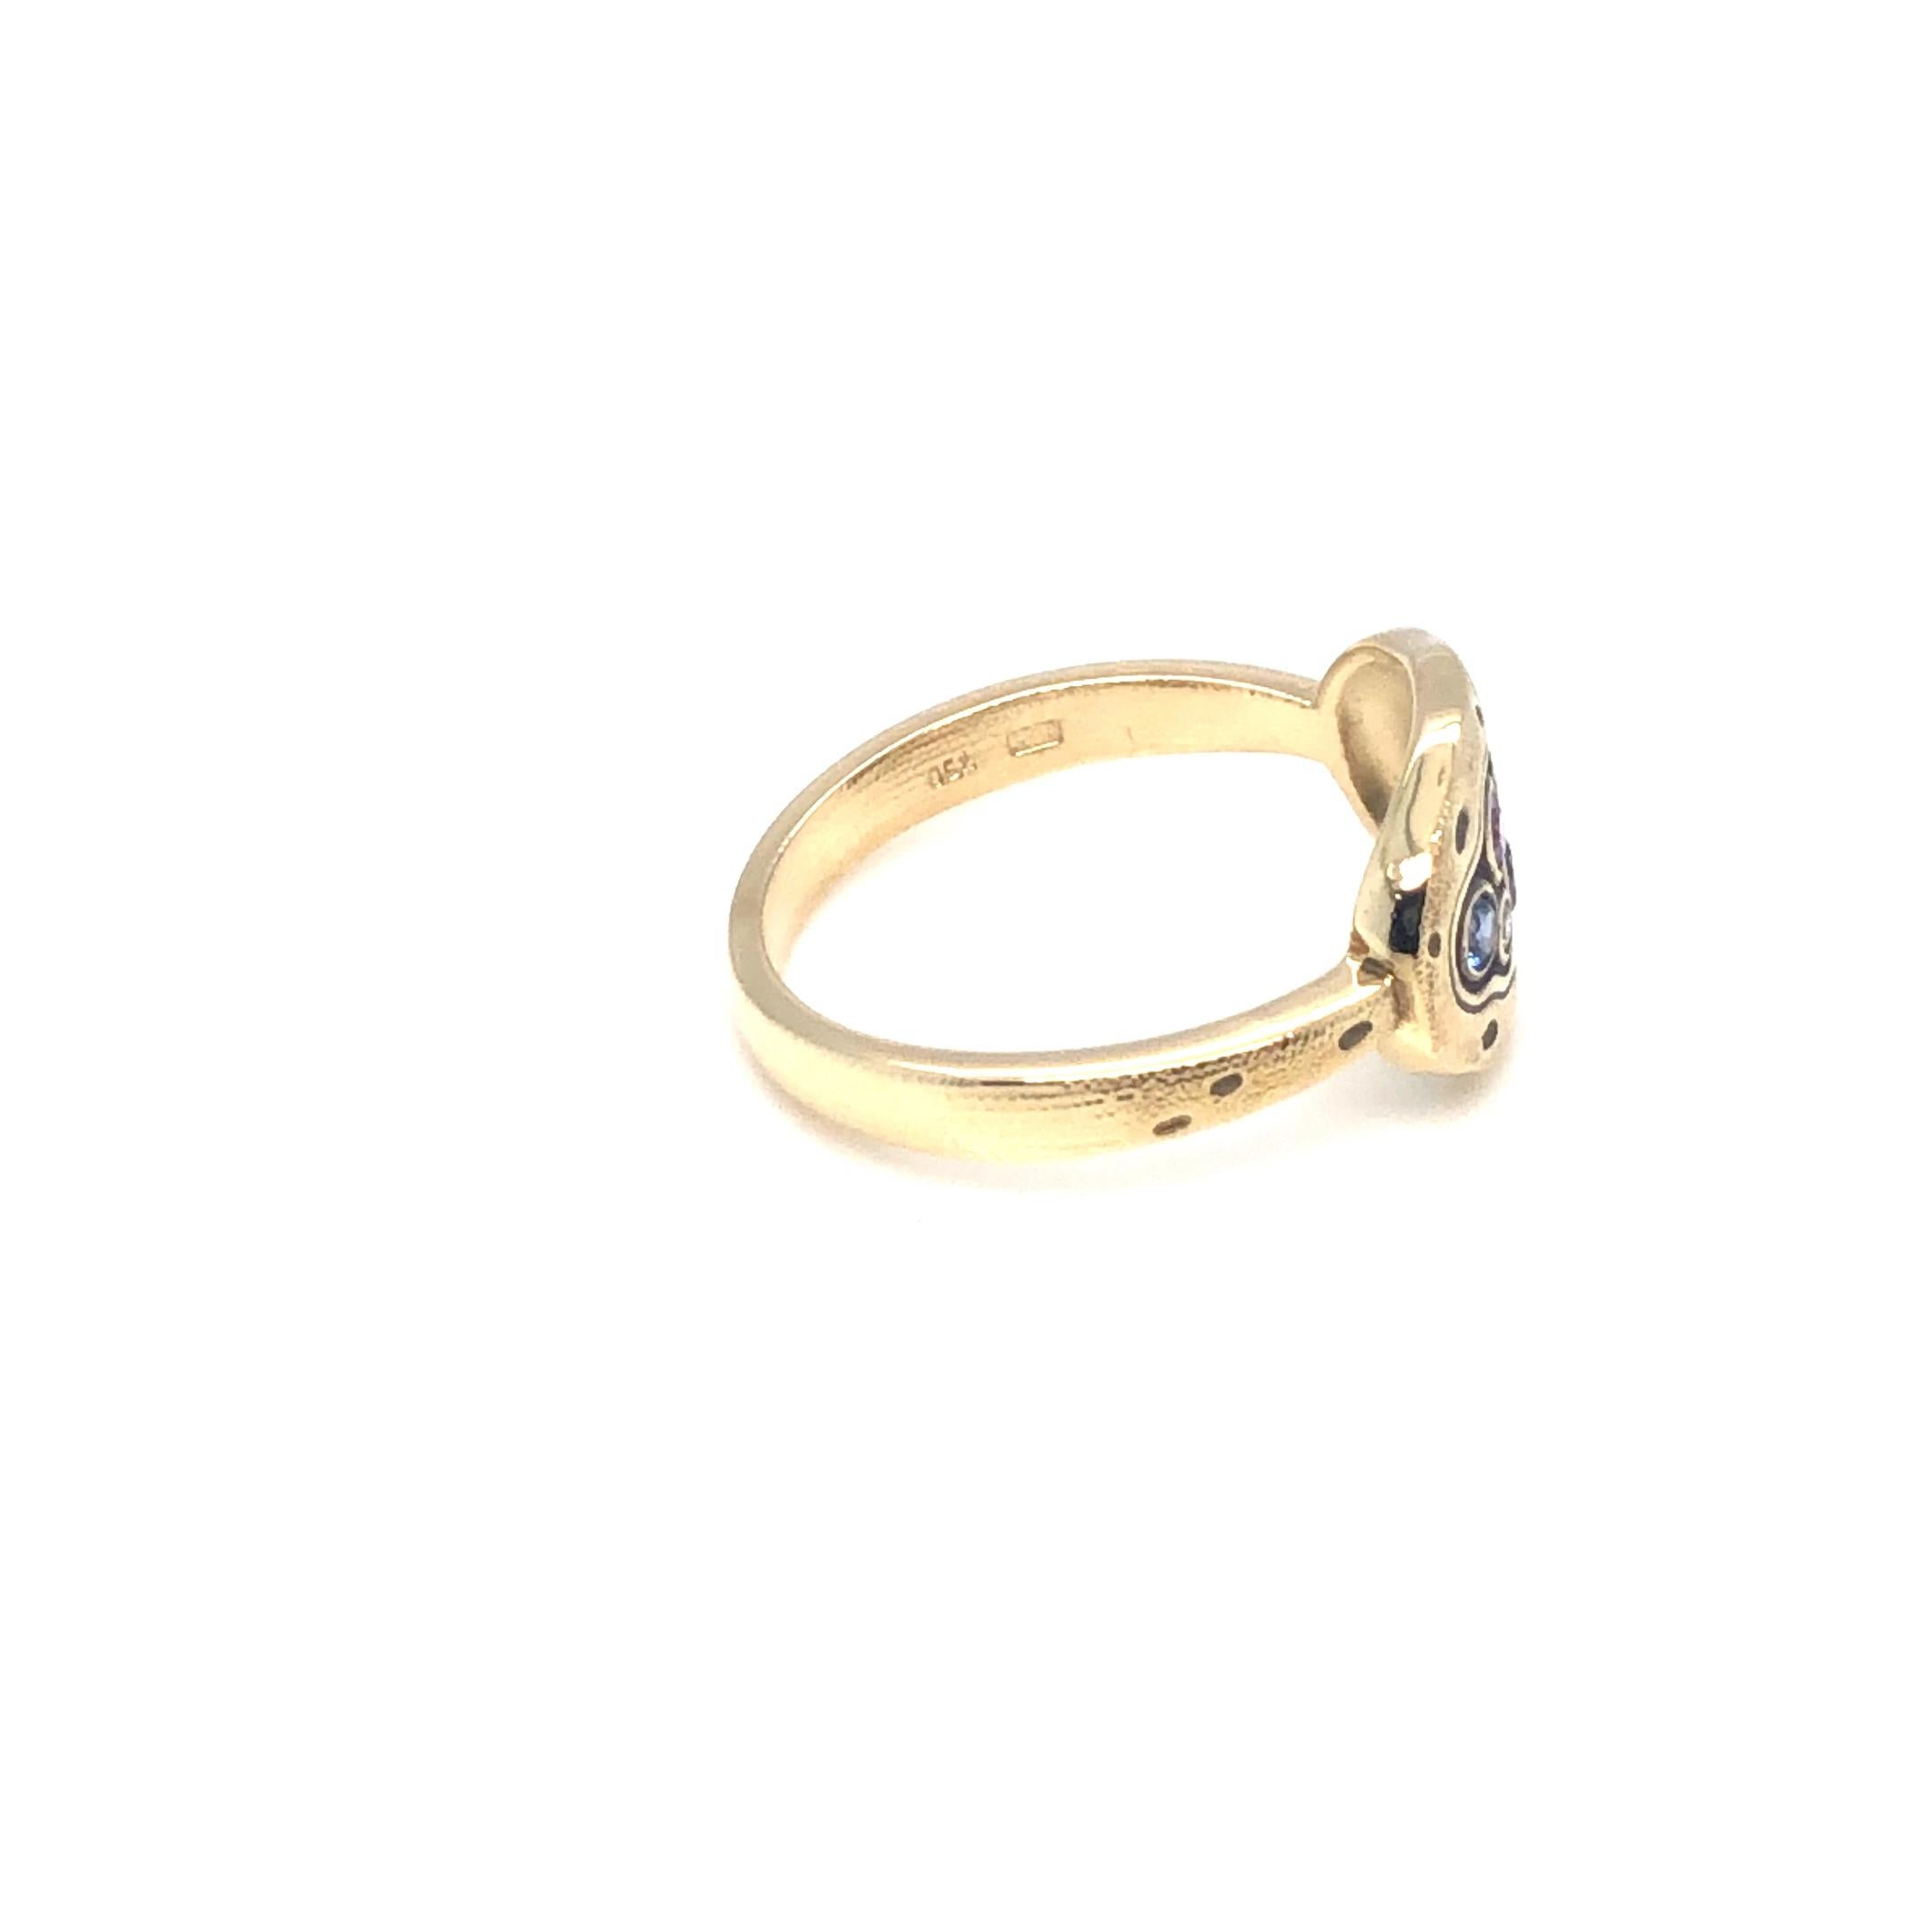 Alex Sepkus 'Little Pool' Diamonds and Sapphires Ring 18K Yellow Gold In New Condition For Sale In Dallas, TX